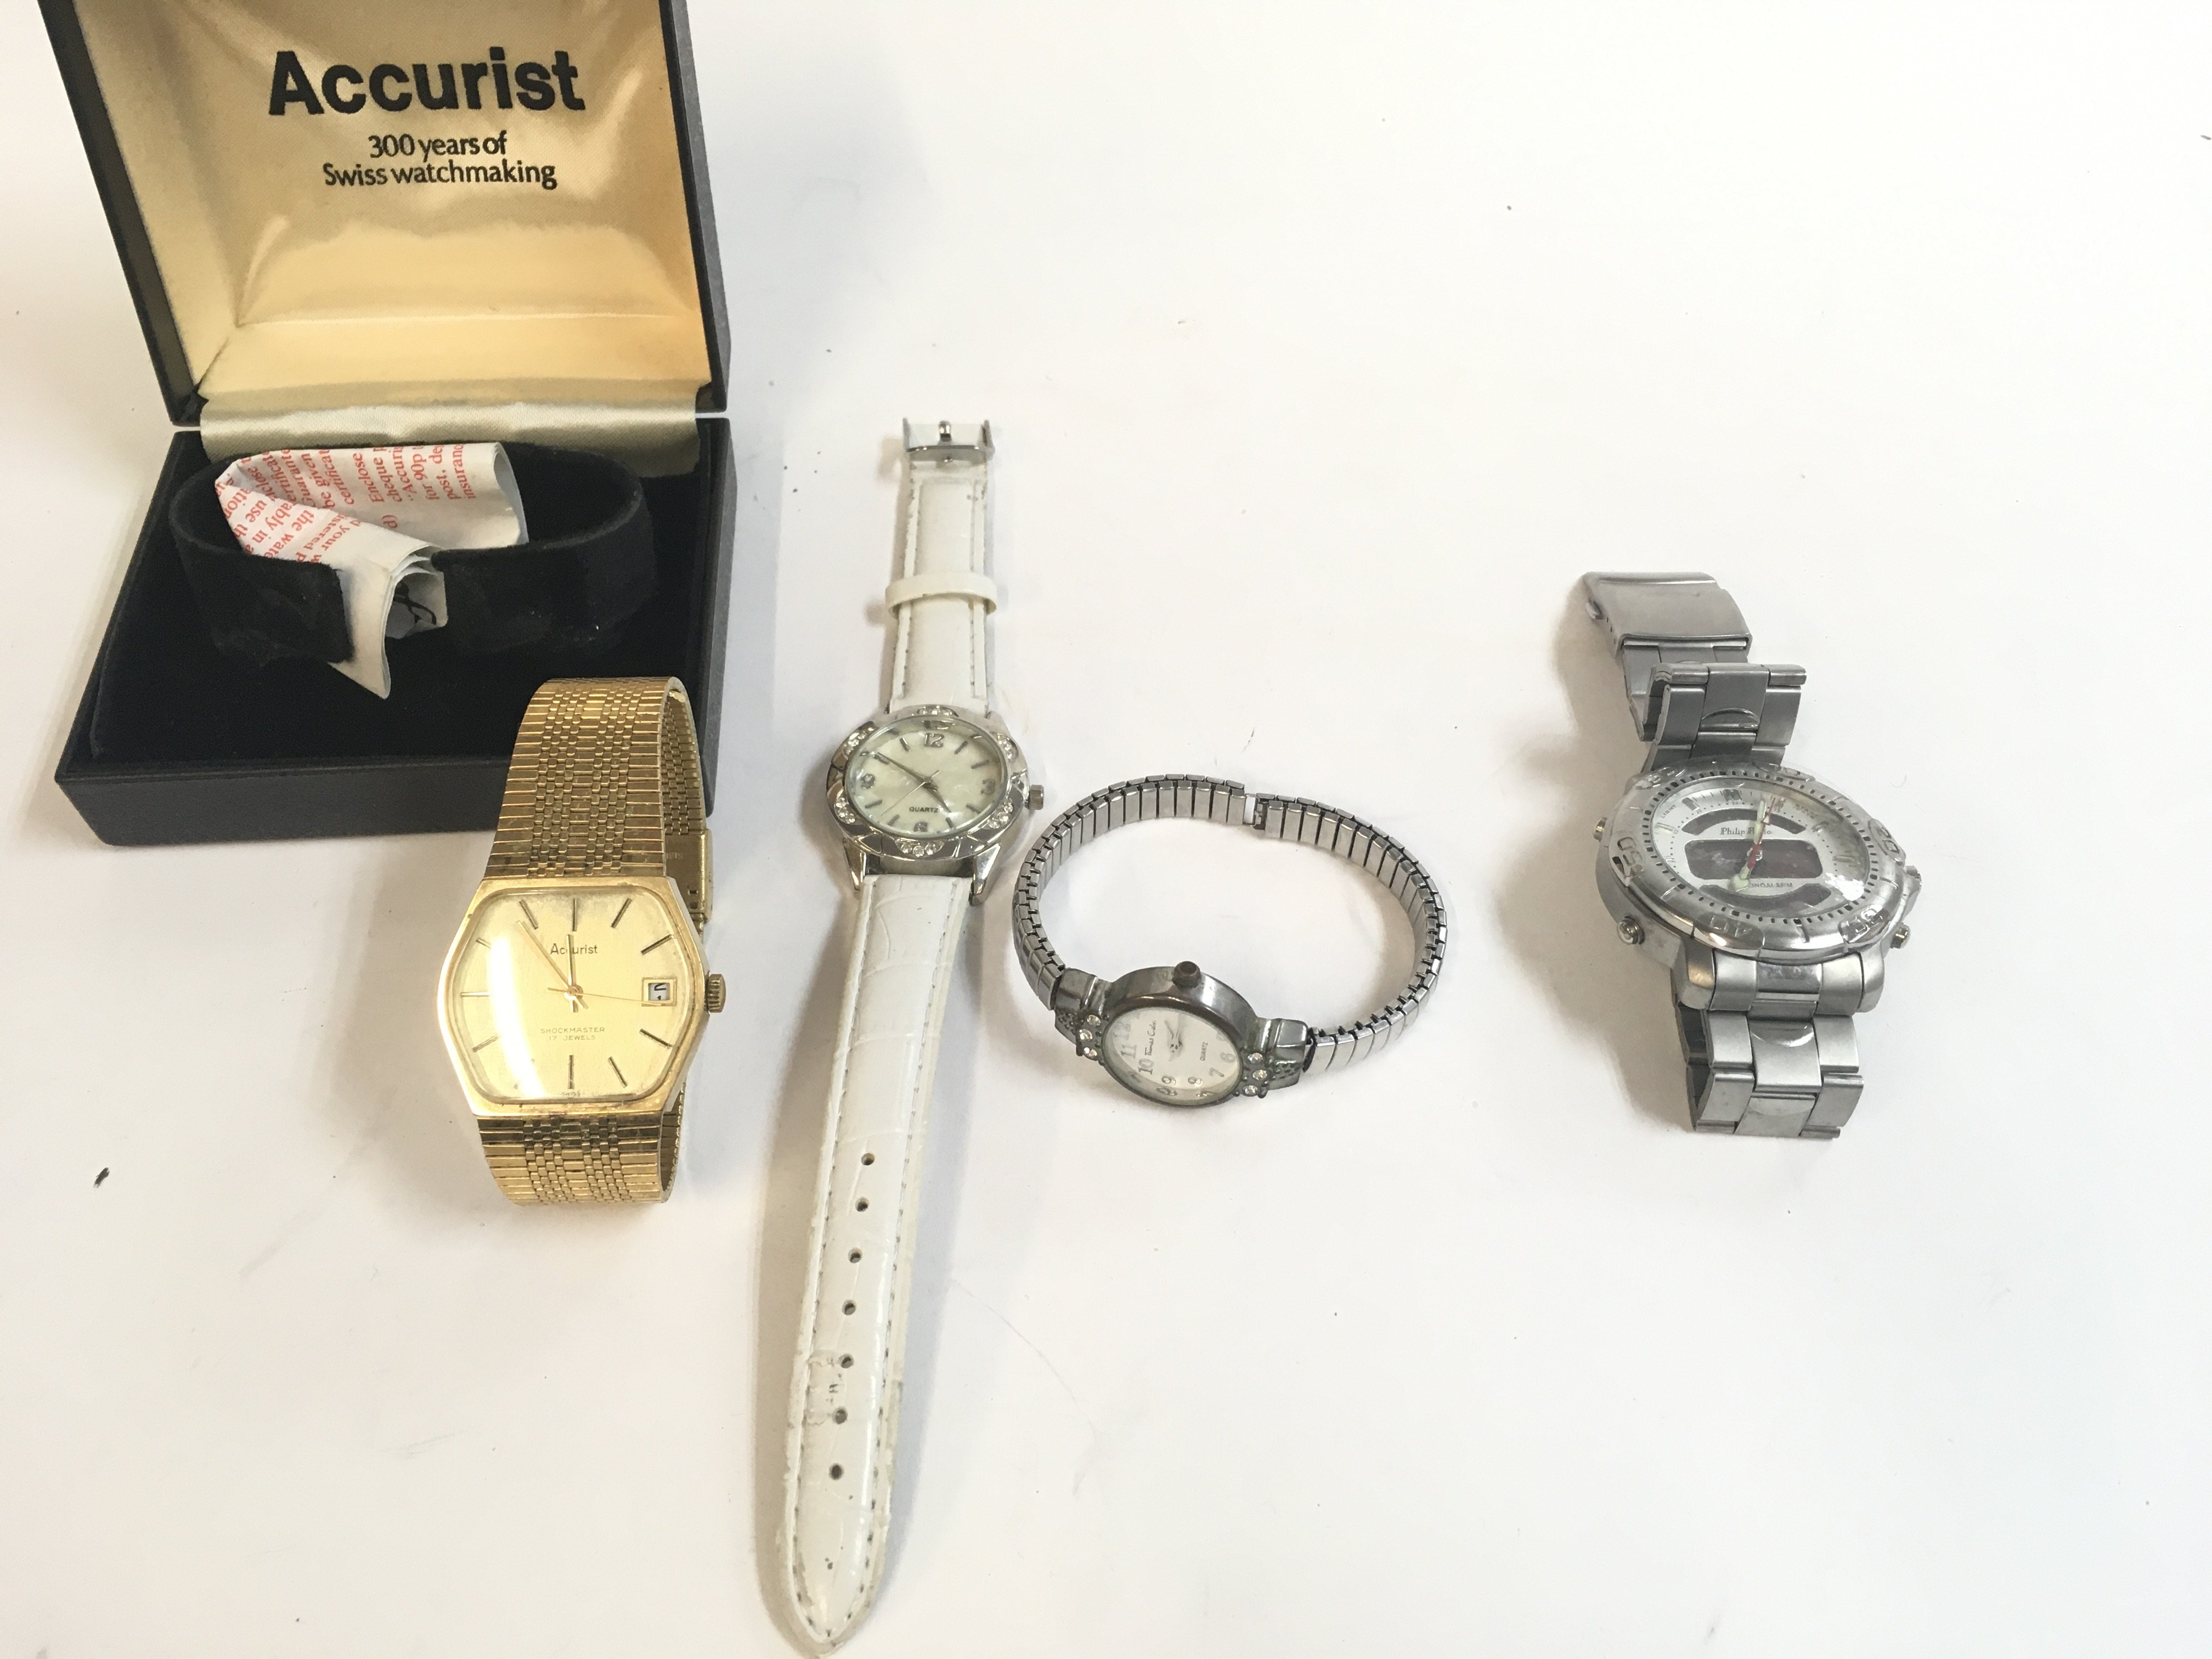 Four dress watches including a Accurist with box w